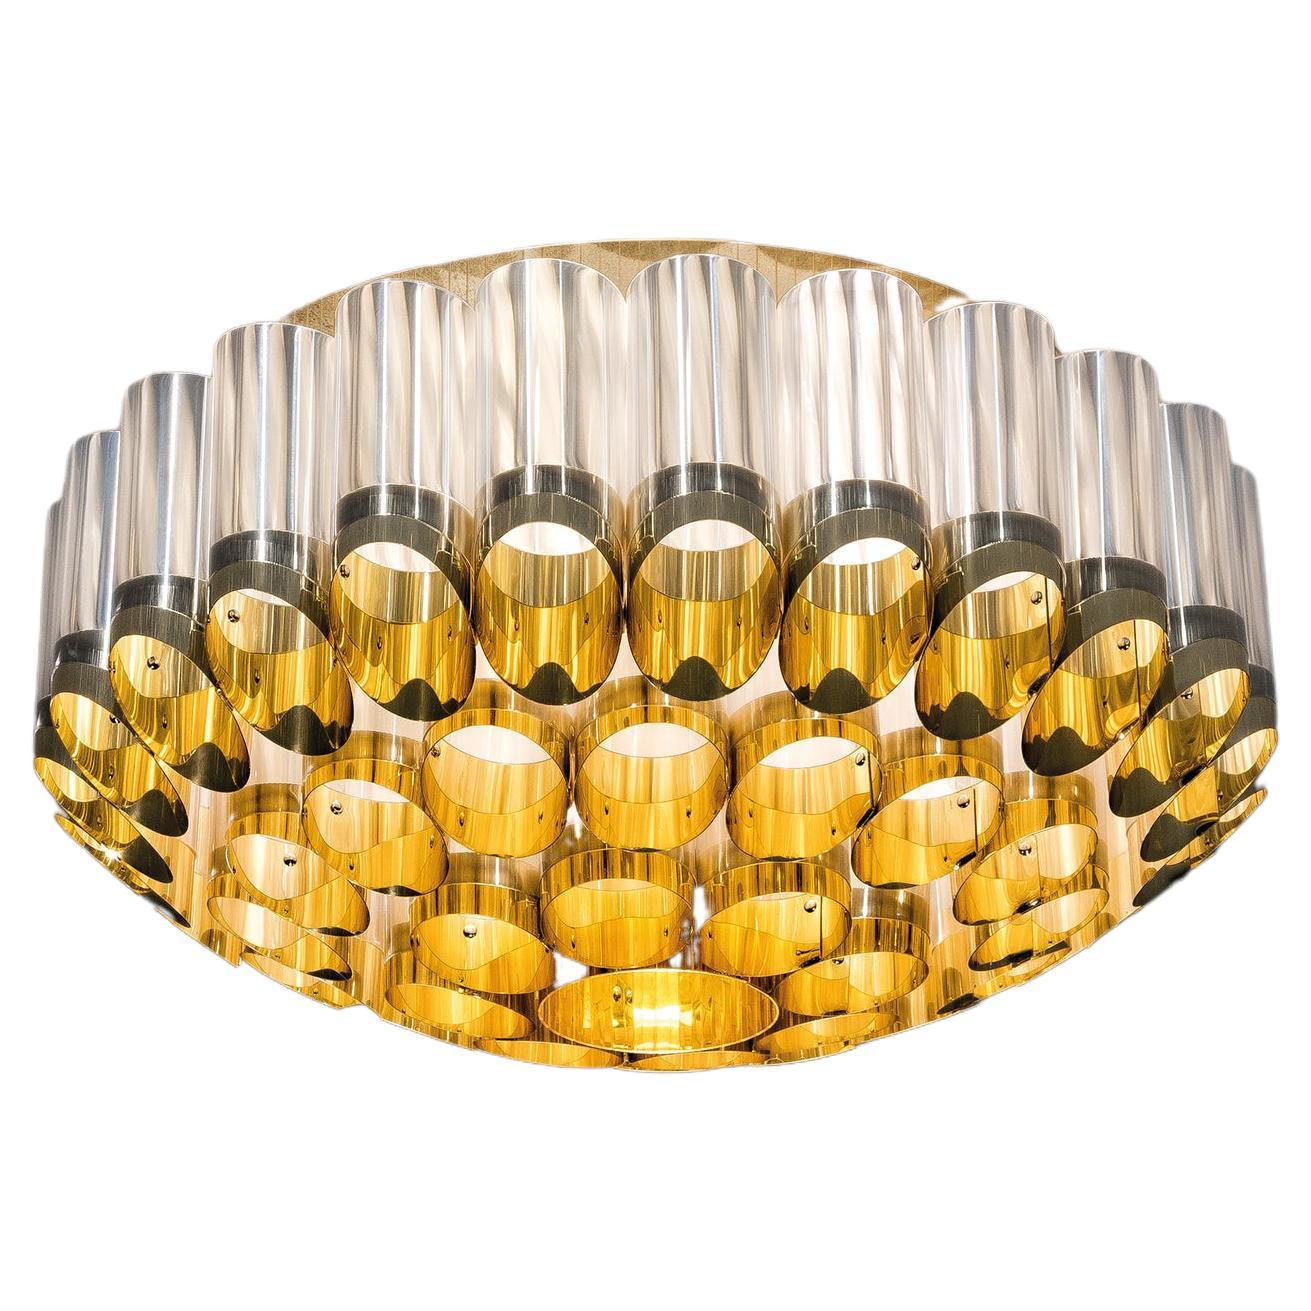 Slamp Odeon 65 Ceiling – Gold Ceiling Light by Lorenza Bozzoli